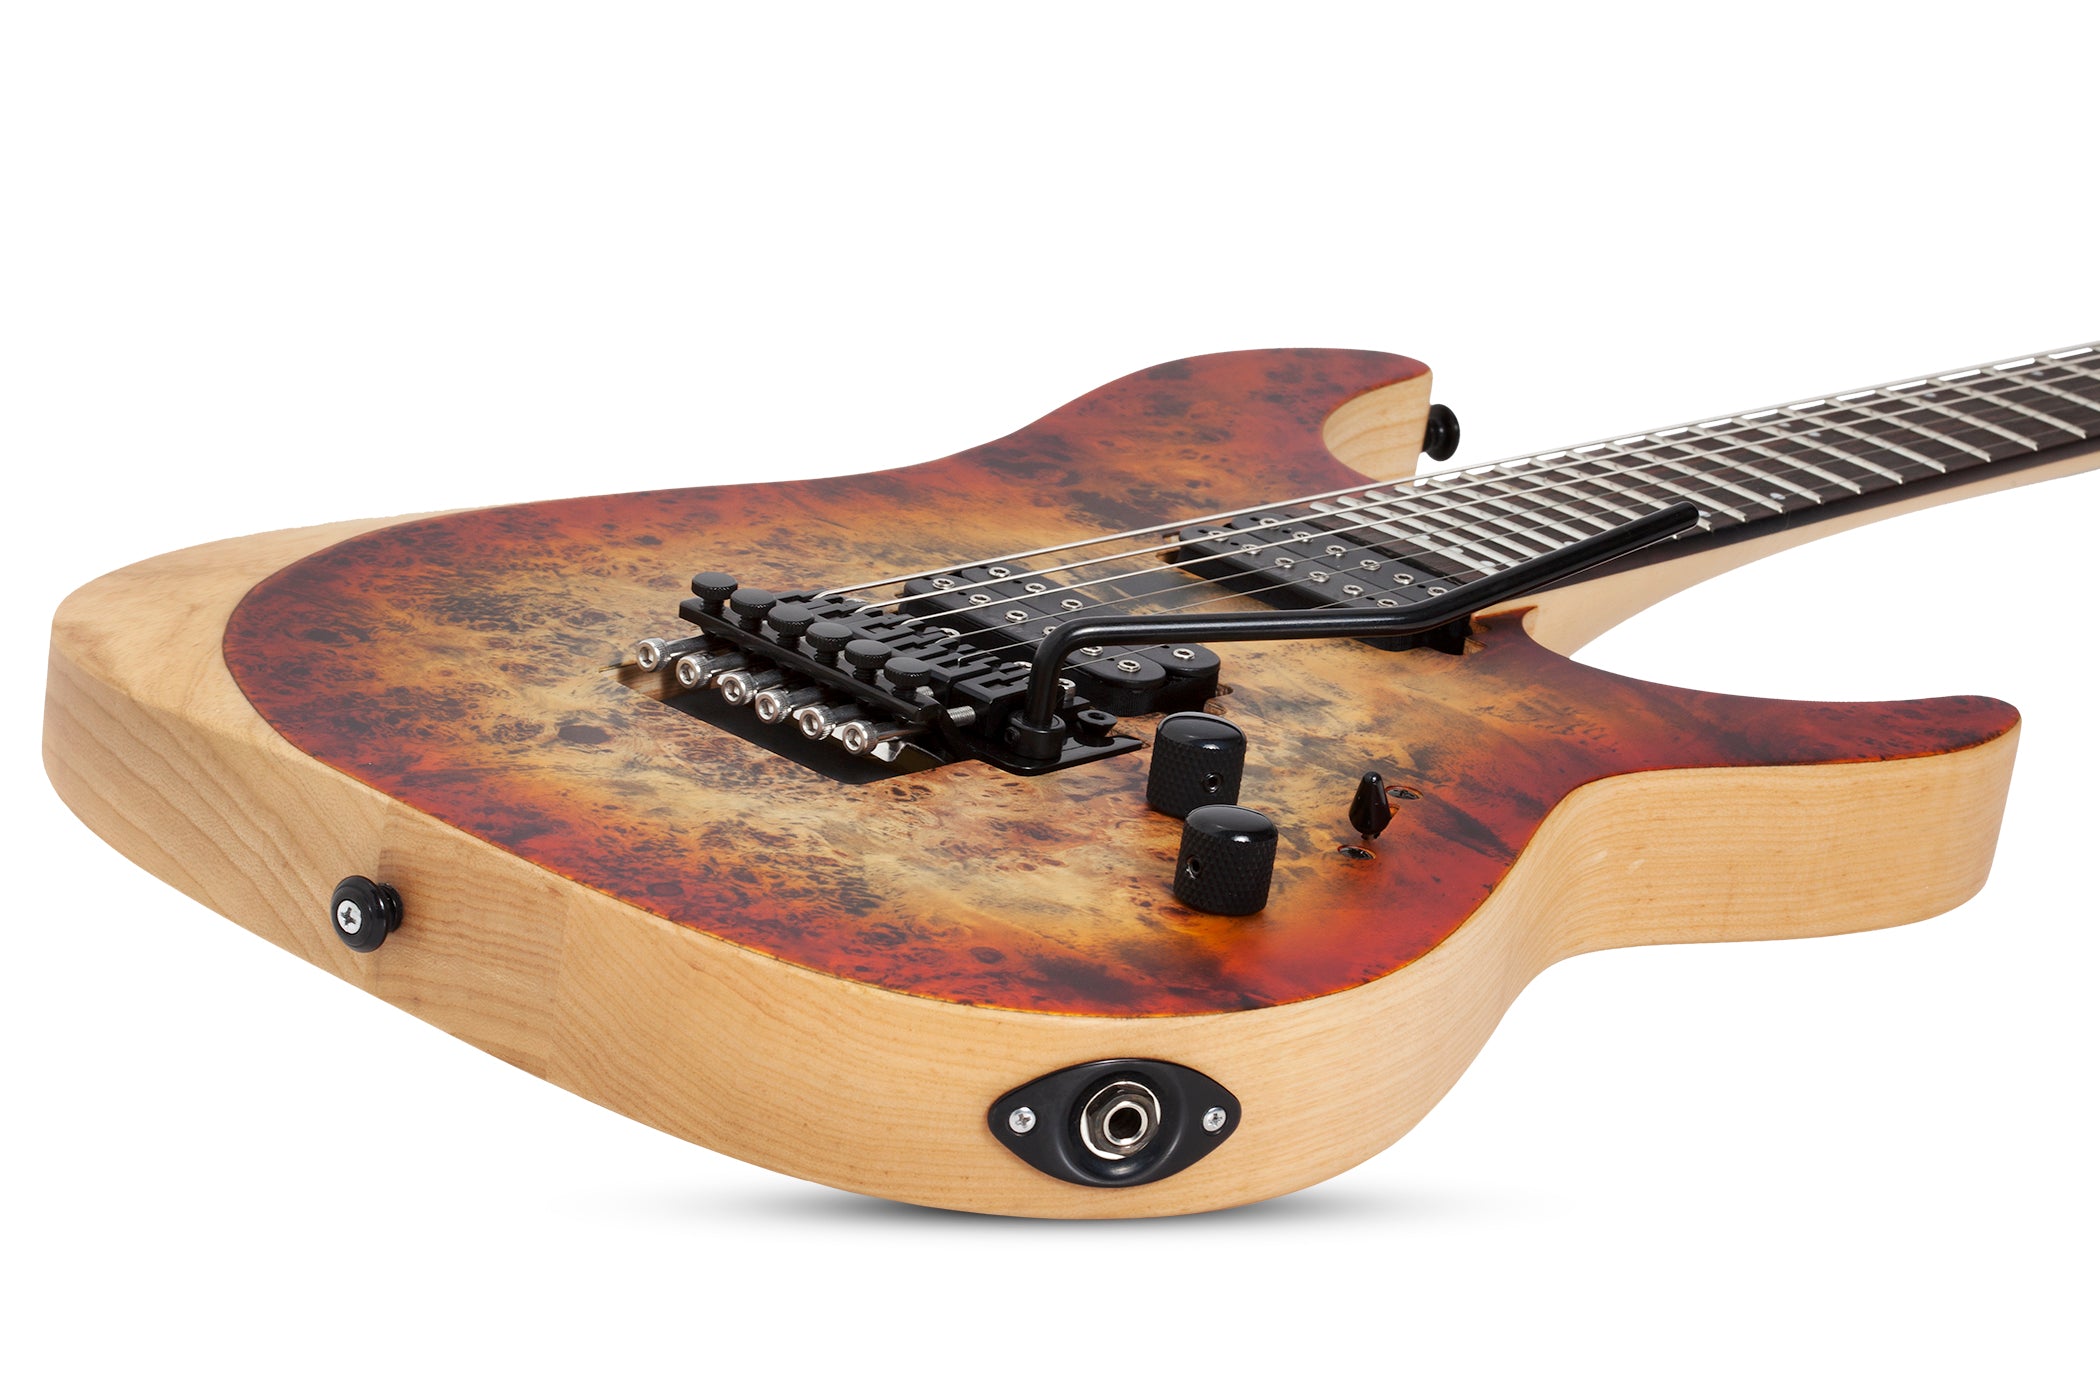 SCHECTER REAPER-6 FLOYD ROSE ELECTRIC GUITAR SATIN INFERNO BURST (1505) MADE IN INDONESIA, SCHECTER, ELECTRIC GUITAR, schecter-electric-guitar-reaper-6-fr-sfb, ZOSO MUSIC SDN BHD